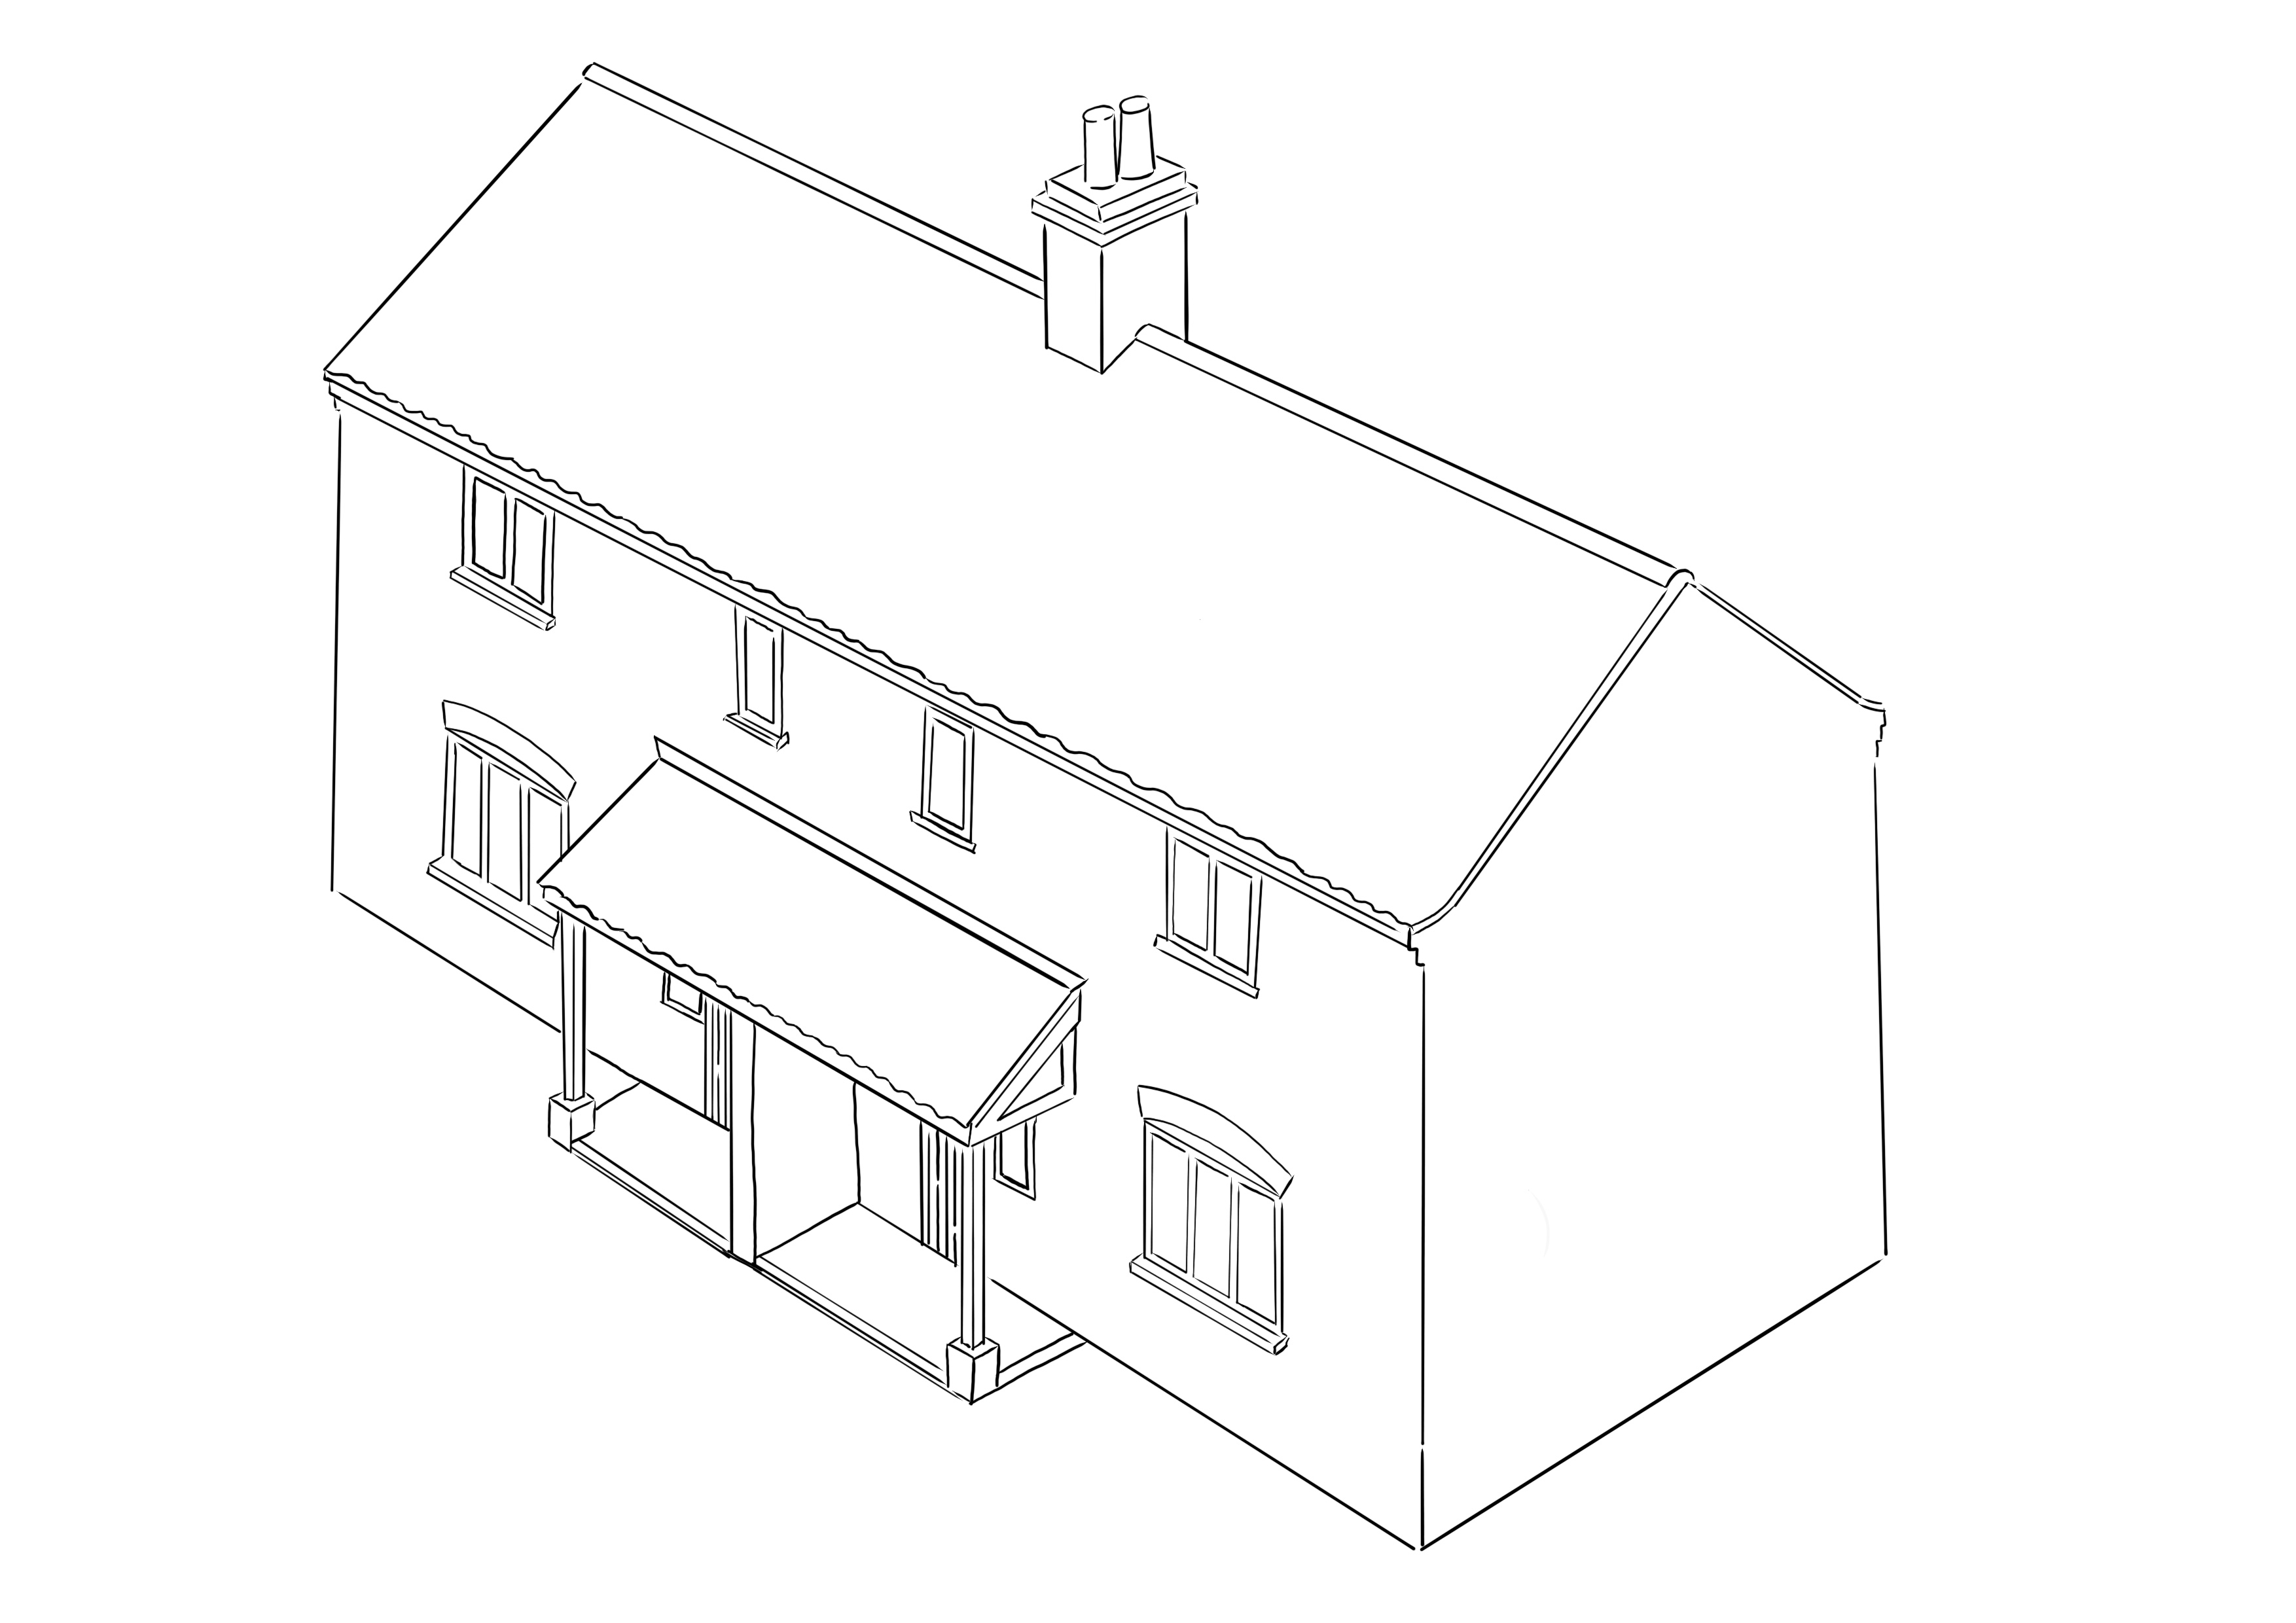 A simple vernacular style that can be used for detached, semi-detached or terraced properties.